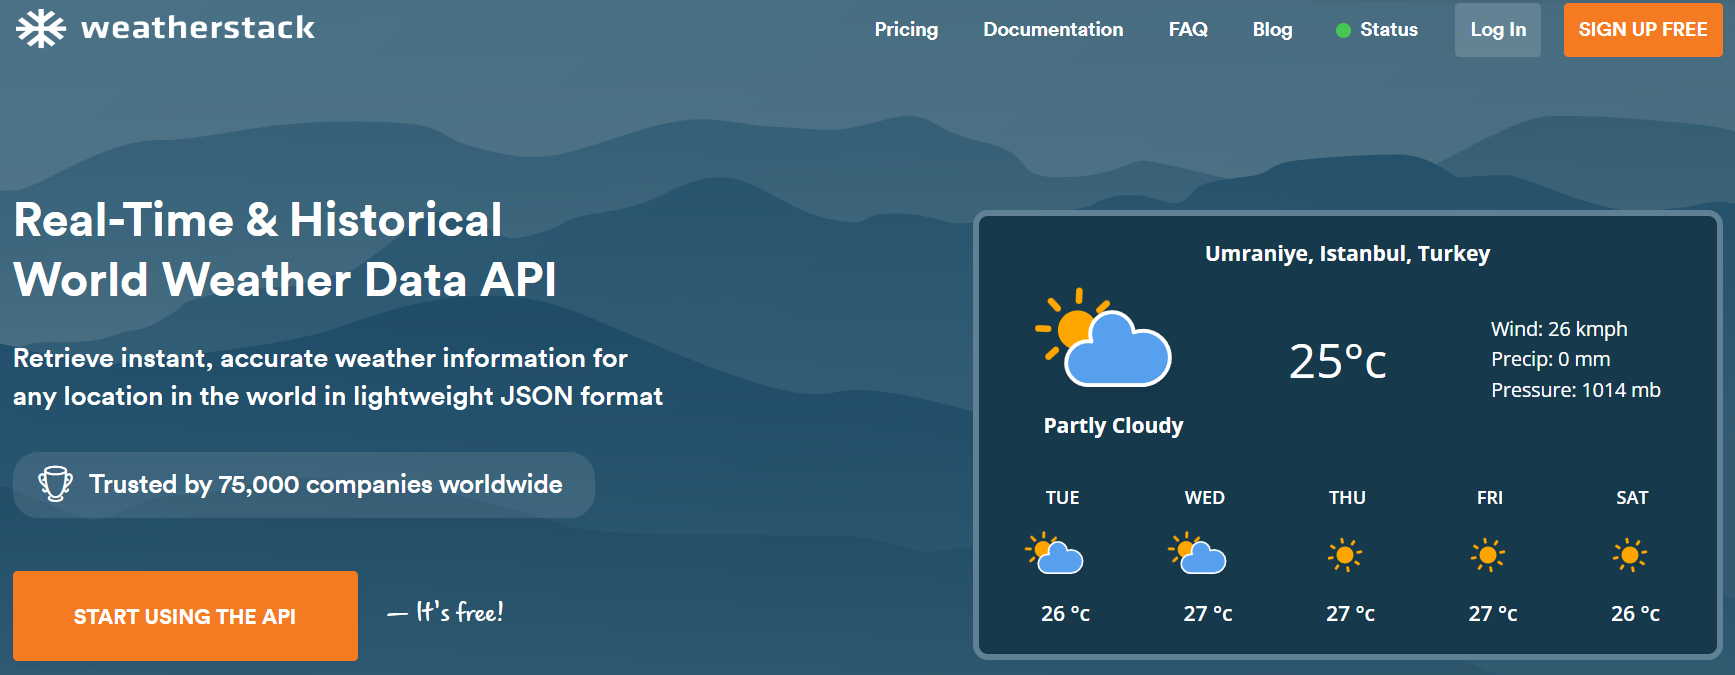 home page of the weatherstack weather api